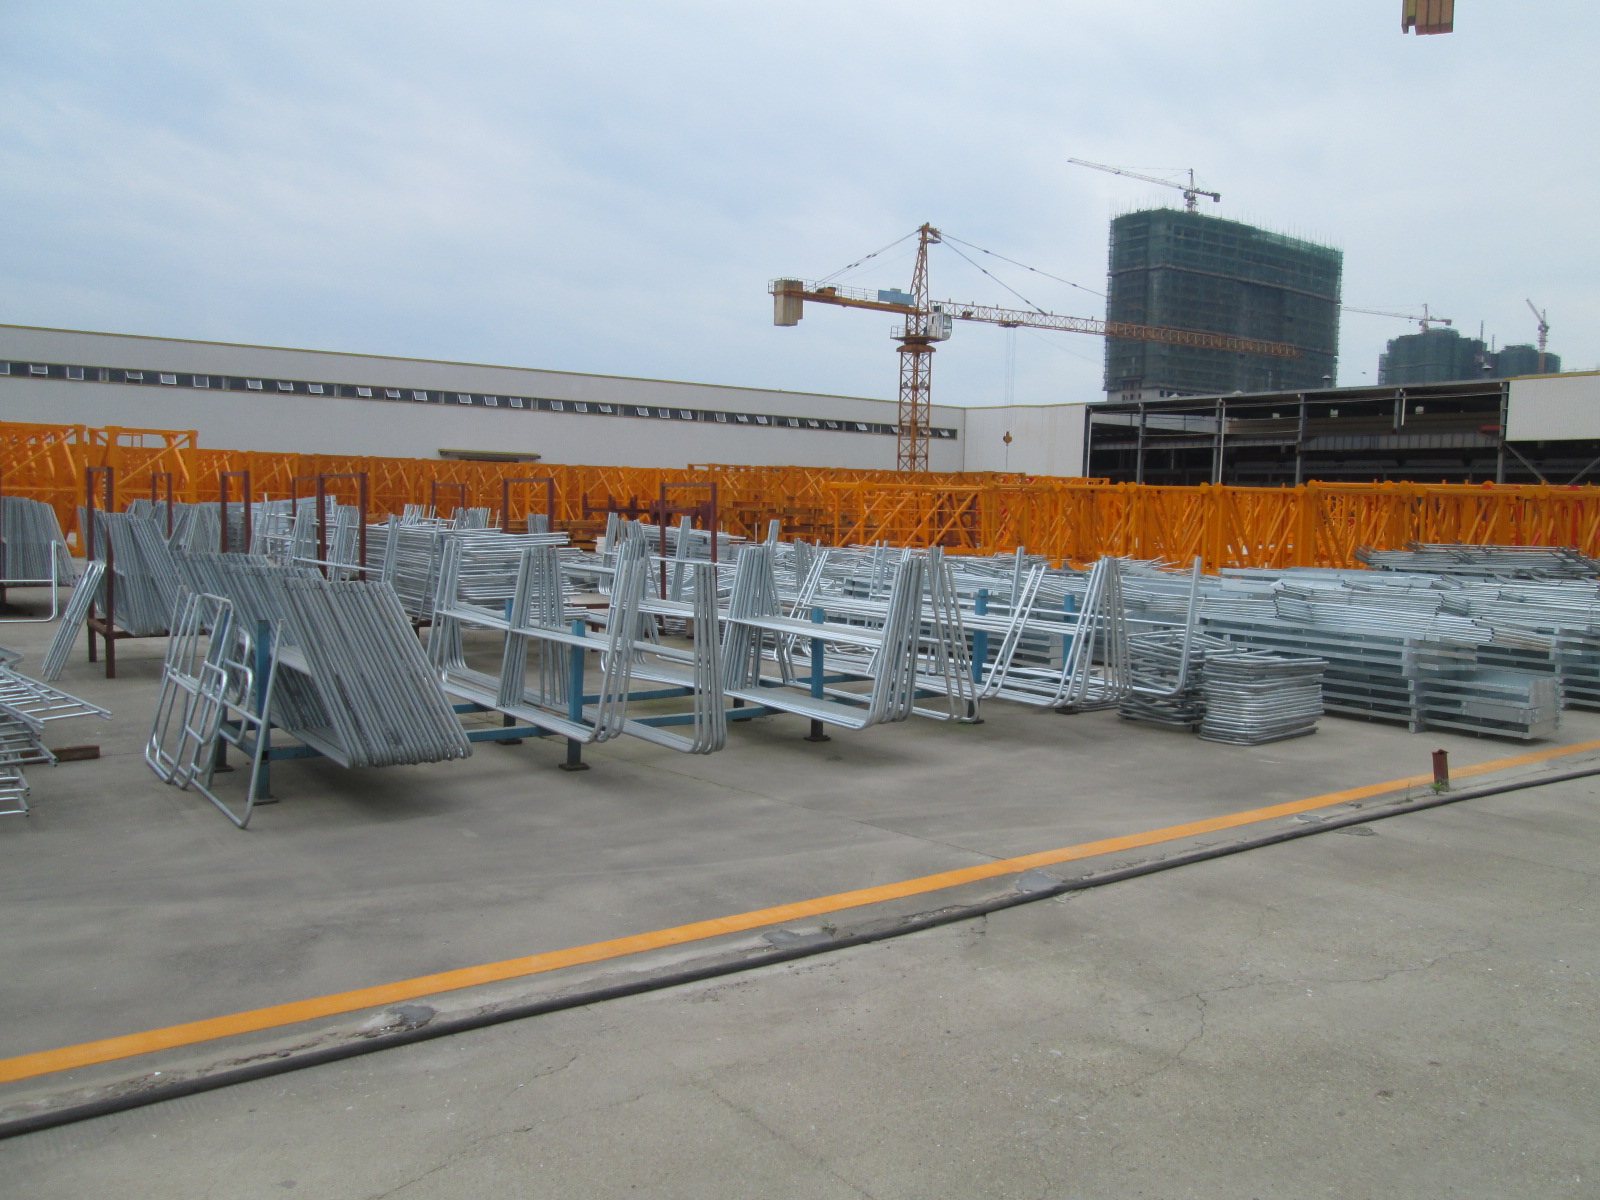 Finished products hot-dip galvanizing area